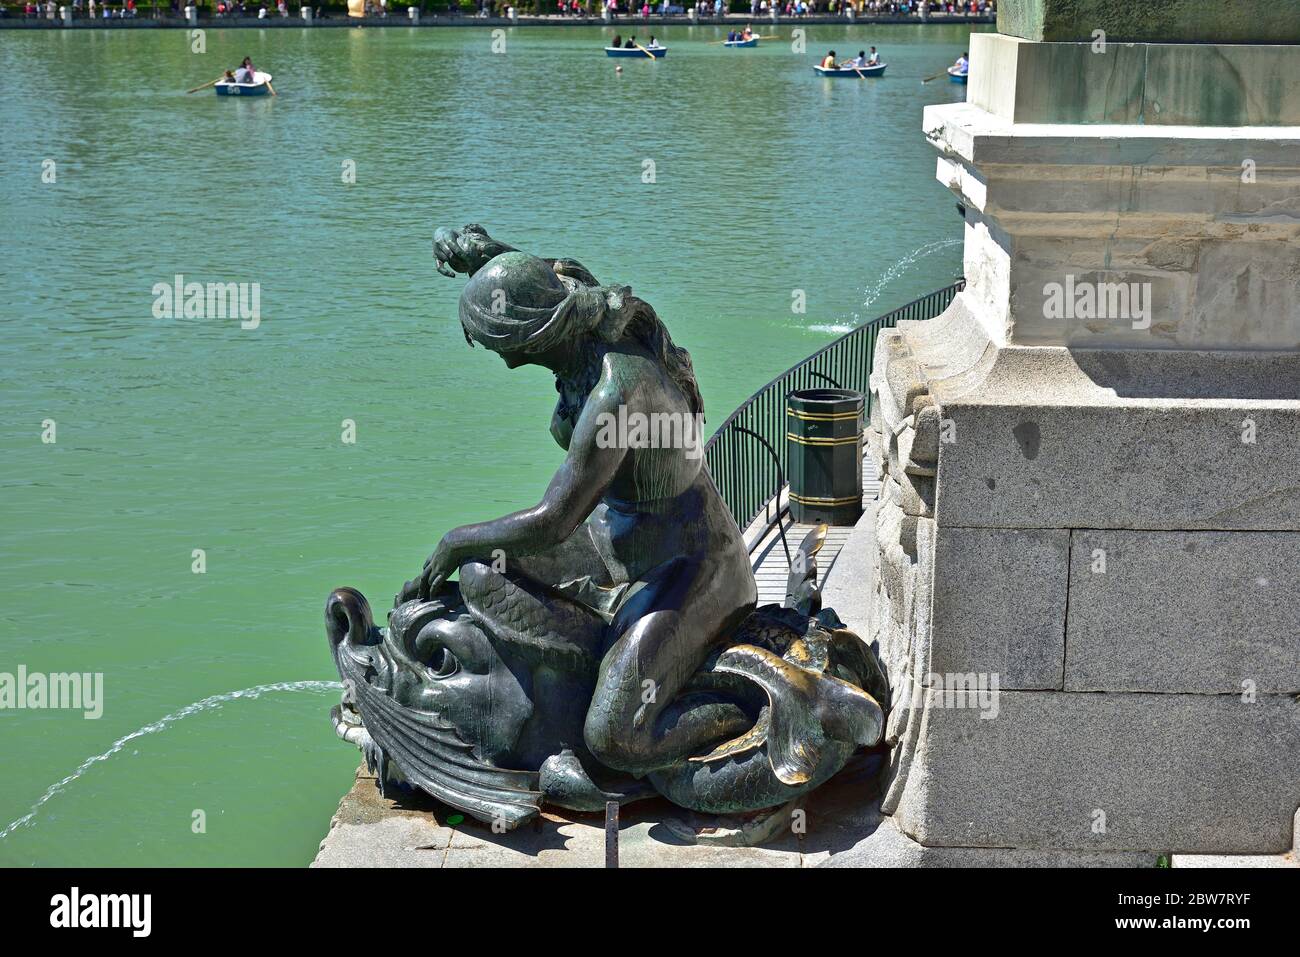 One of many of statue guarding the Monument to Alfonso XII in Jardines del Buen Retiro, the main parc of the city of Madrid, capital of Spain. Stock Photo